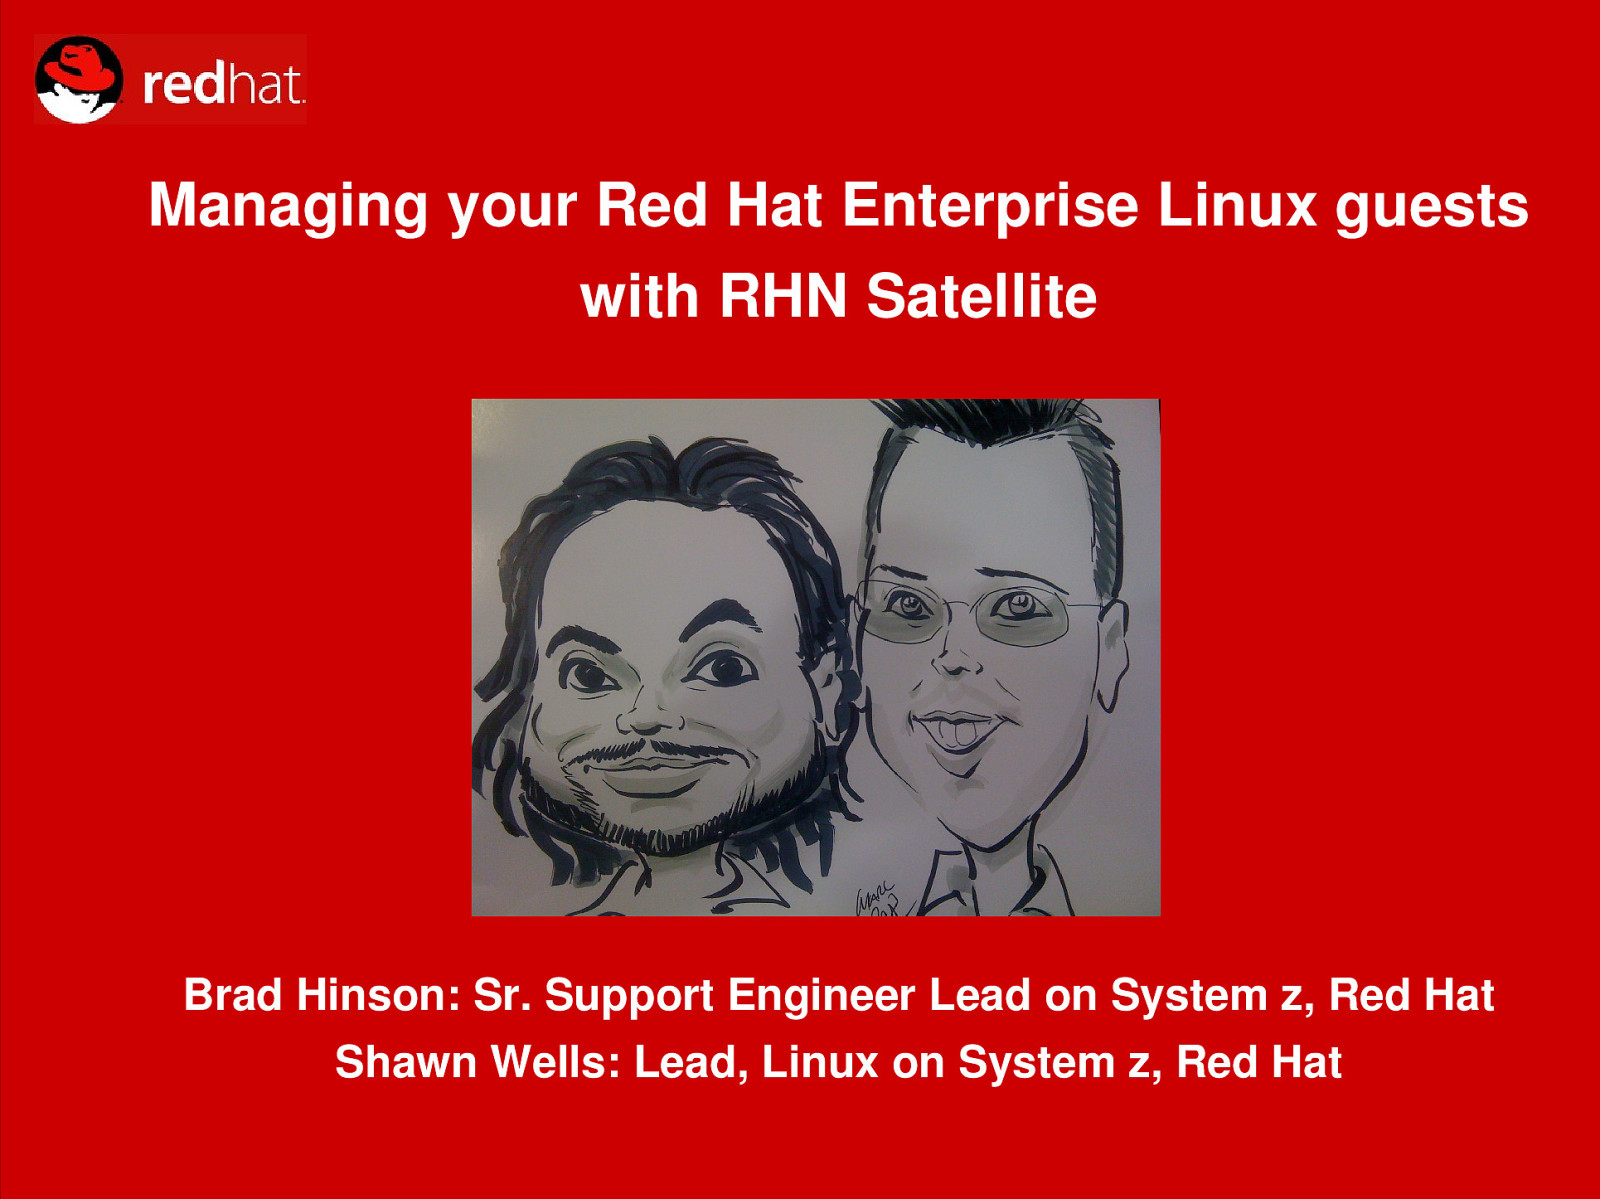 Managing your Red Hat Enterprise Linux Guests with RHN Satellite